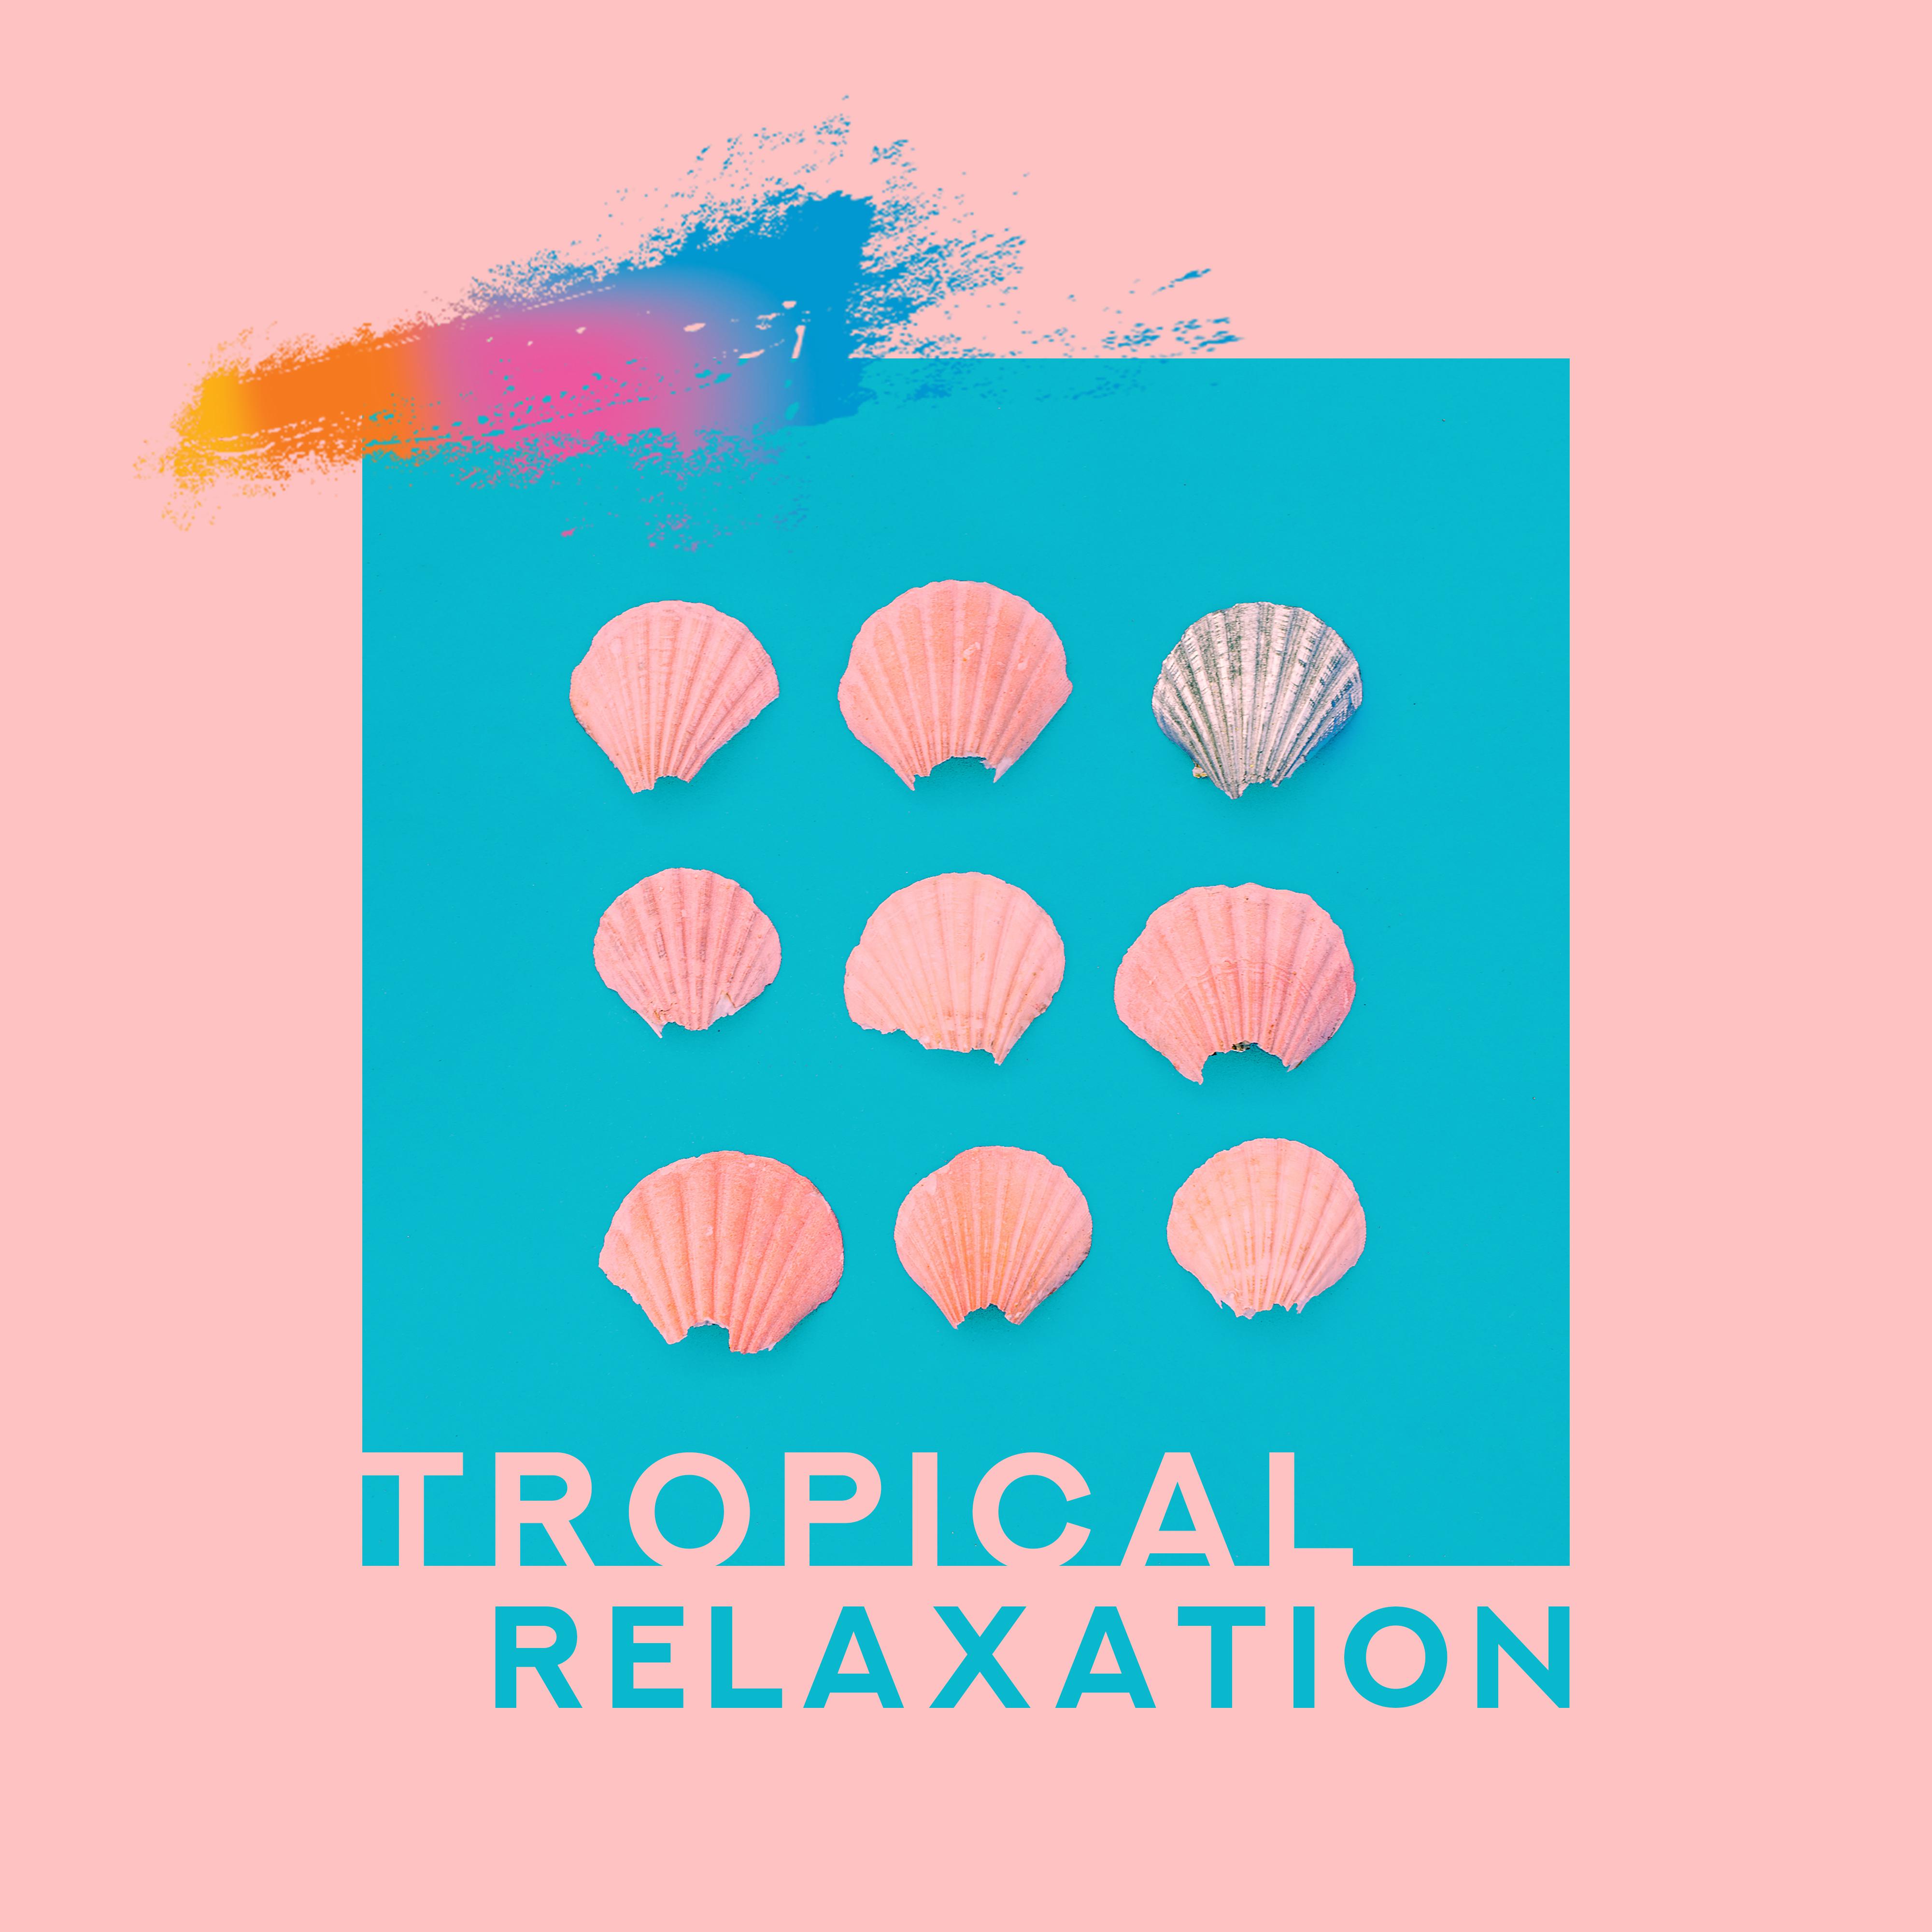 Tropical Relaxation - Ibiza Poolside, Chill Out 2019, Summer Beats for Relaxation, Dance Music, Ibiza Summer Rest, New Ambient Chillout